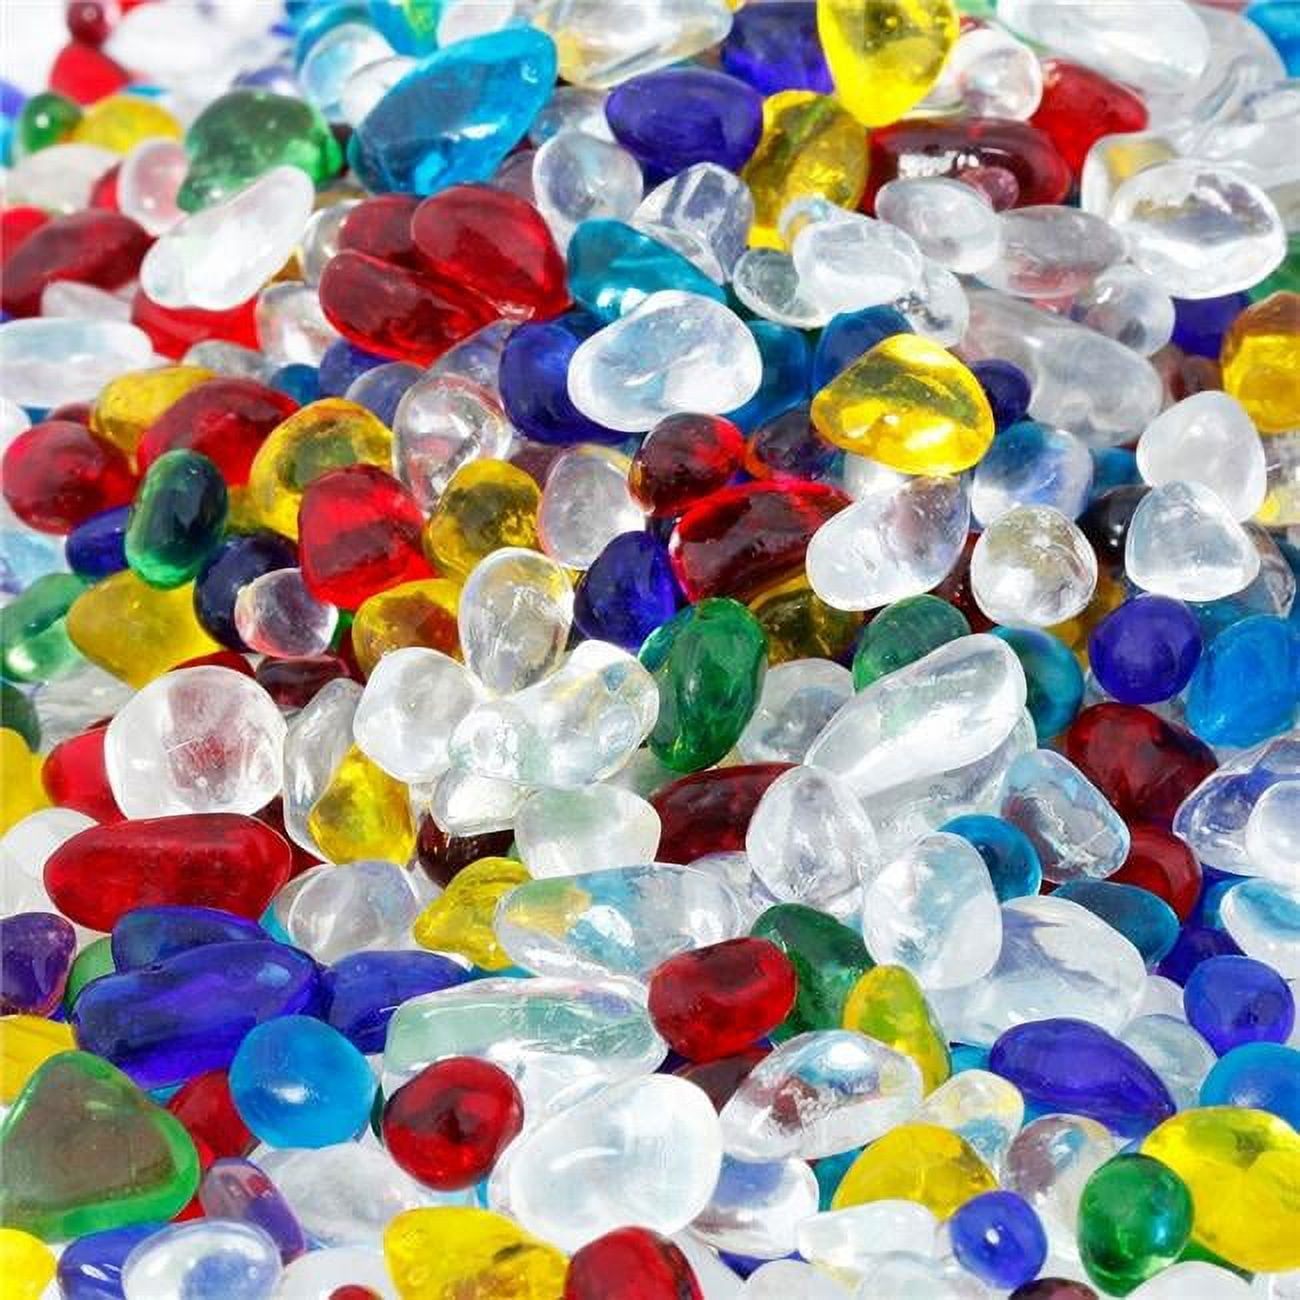 Rk460mx 1 Lbs Lampwork Glass Tumbled Chips Stone